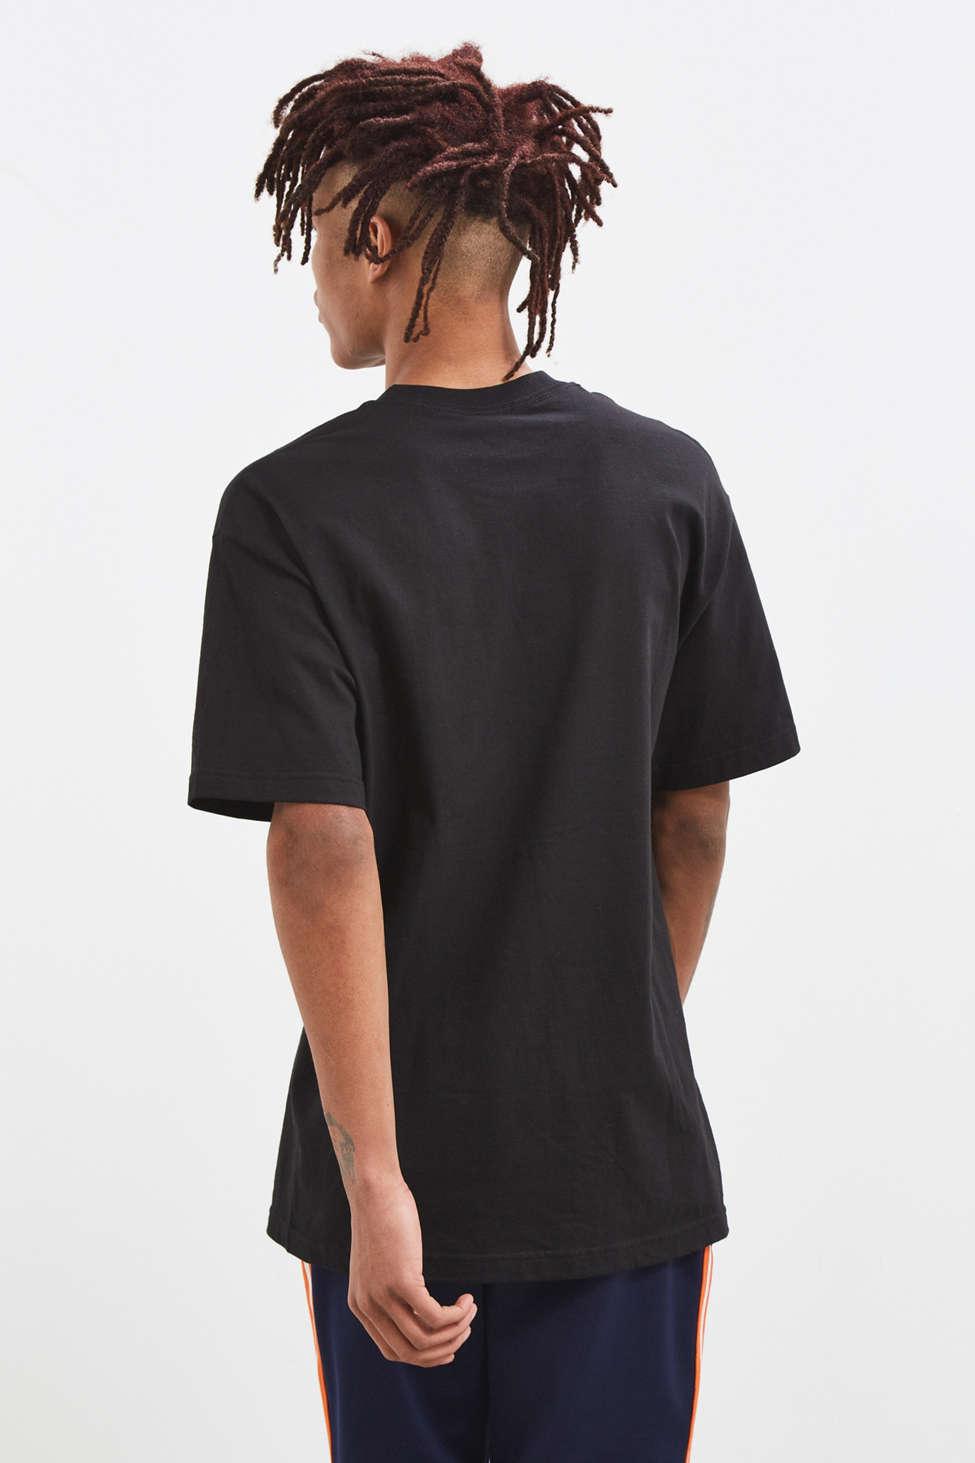 Urban Outfitters Nasty Nas Tee in Black for Men | Lyst